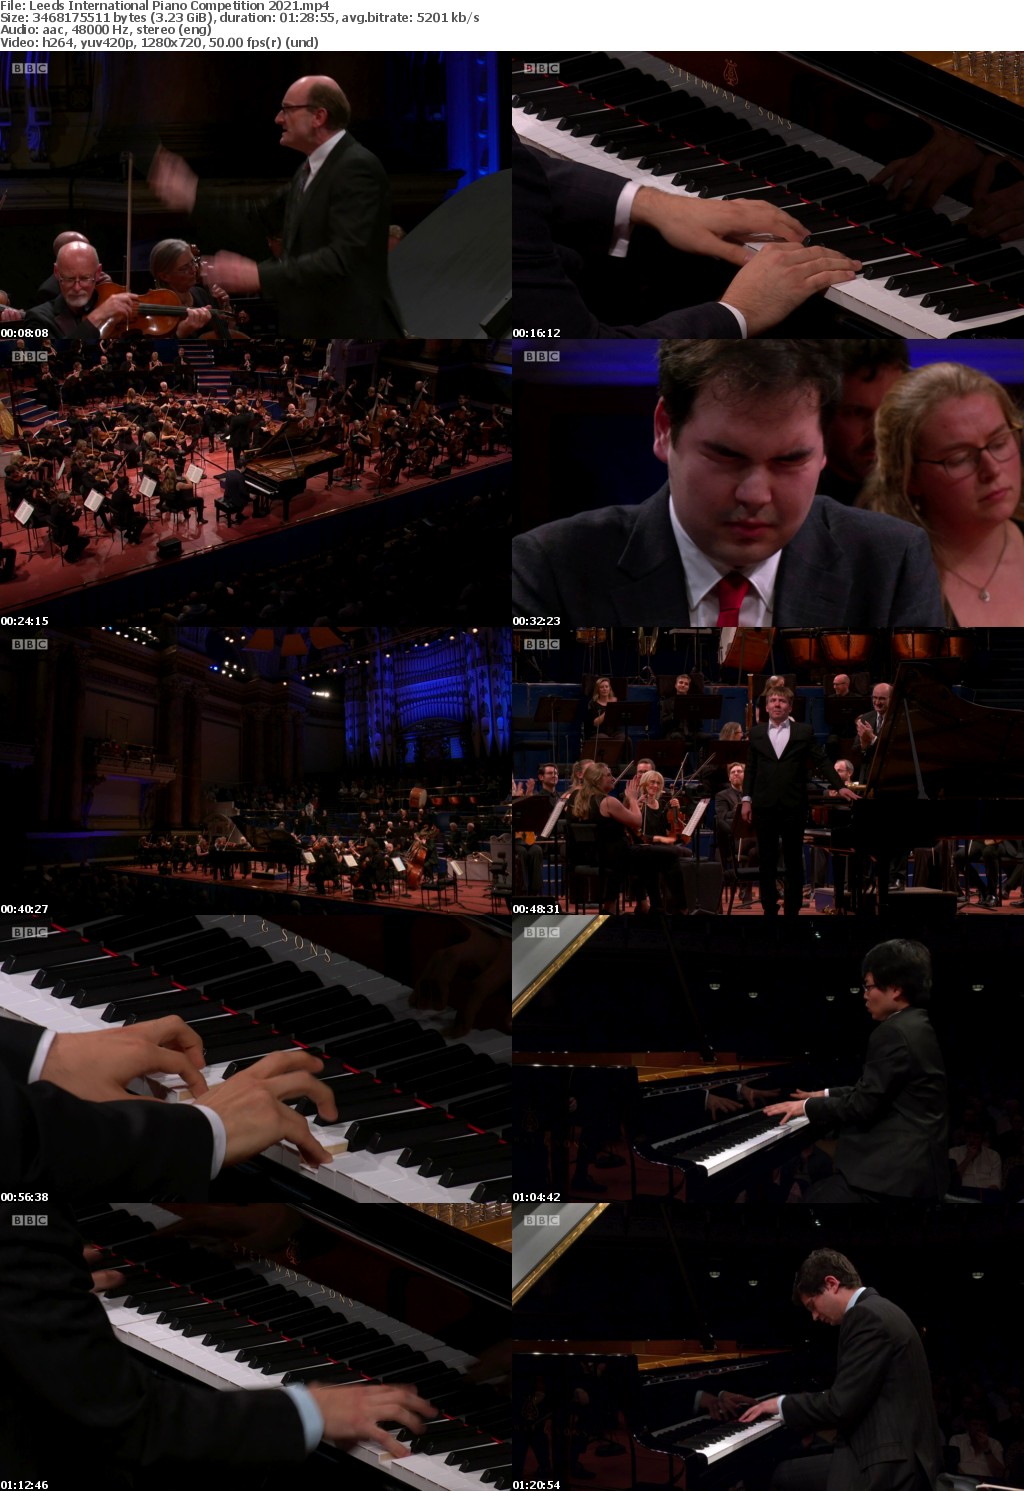 Leeds International Piano Competition 2021 (1280x720p HD, 50fps, soft Eng subs)